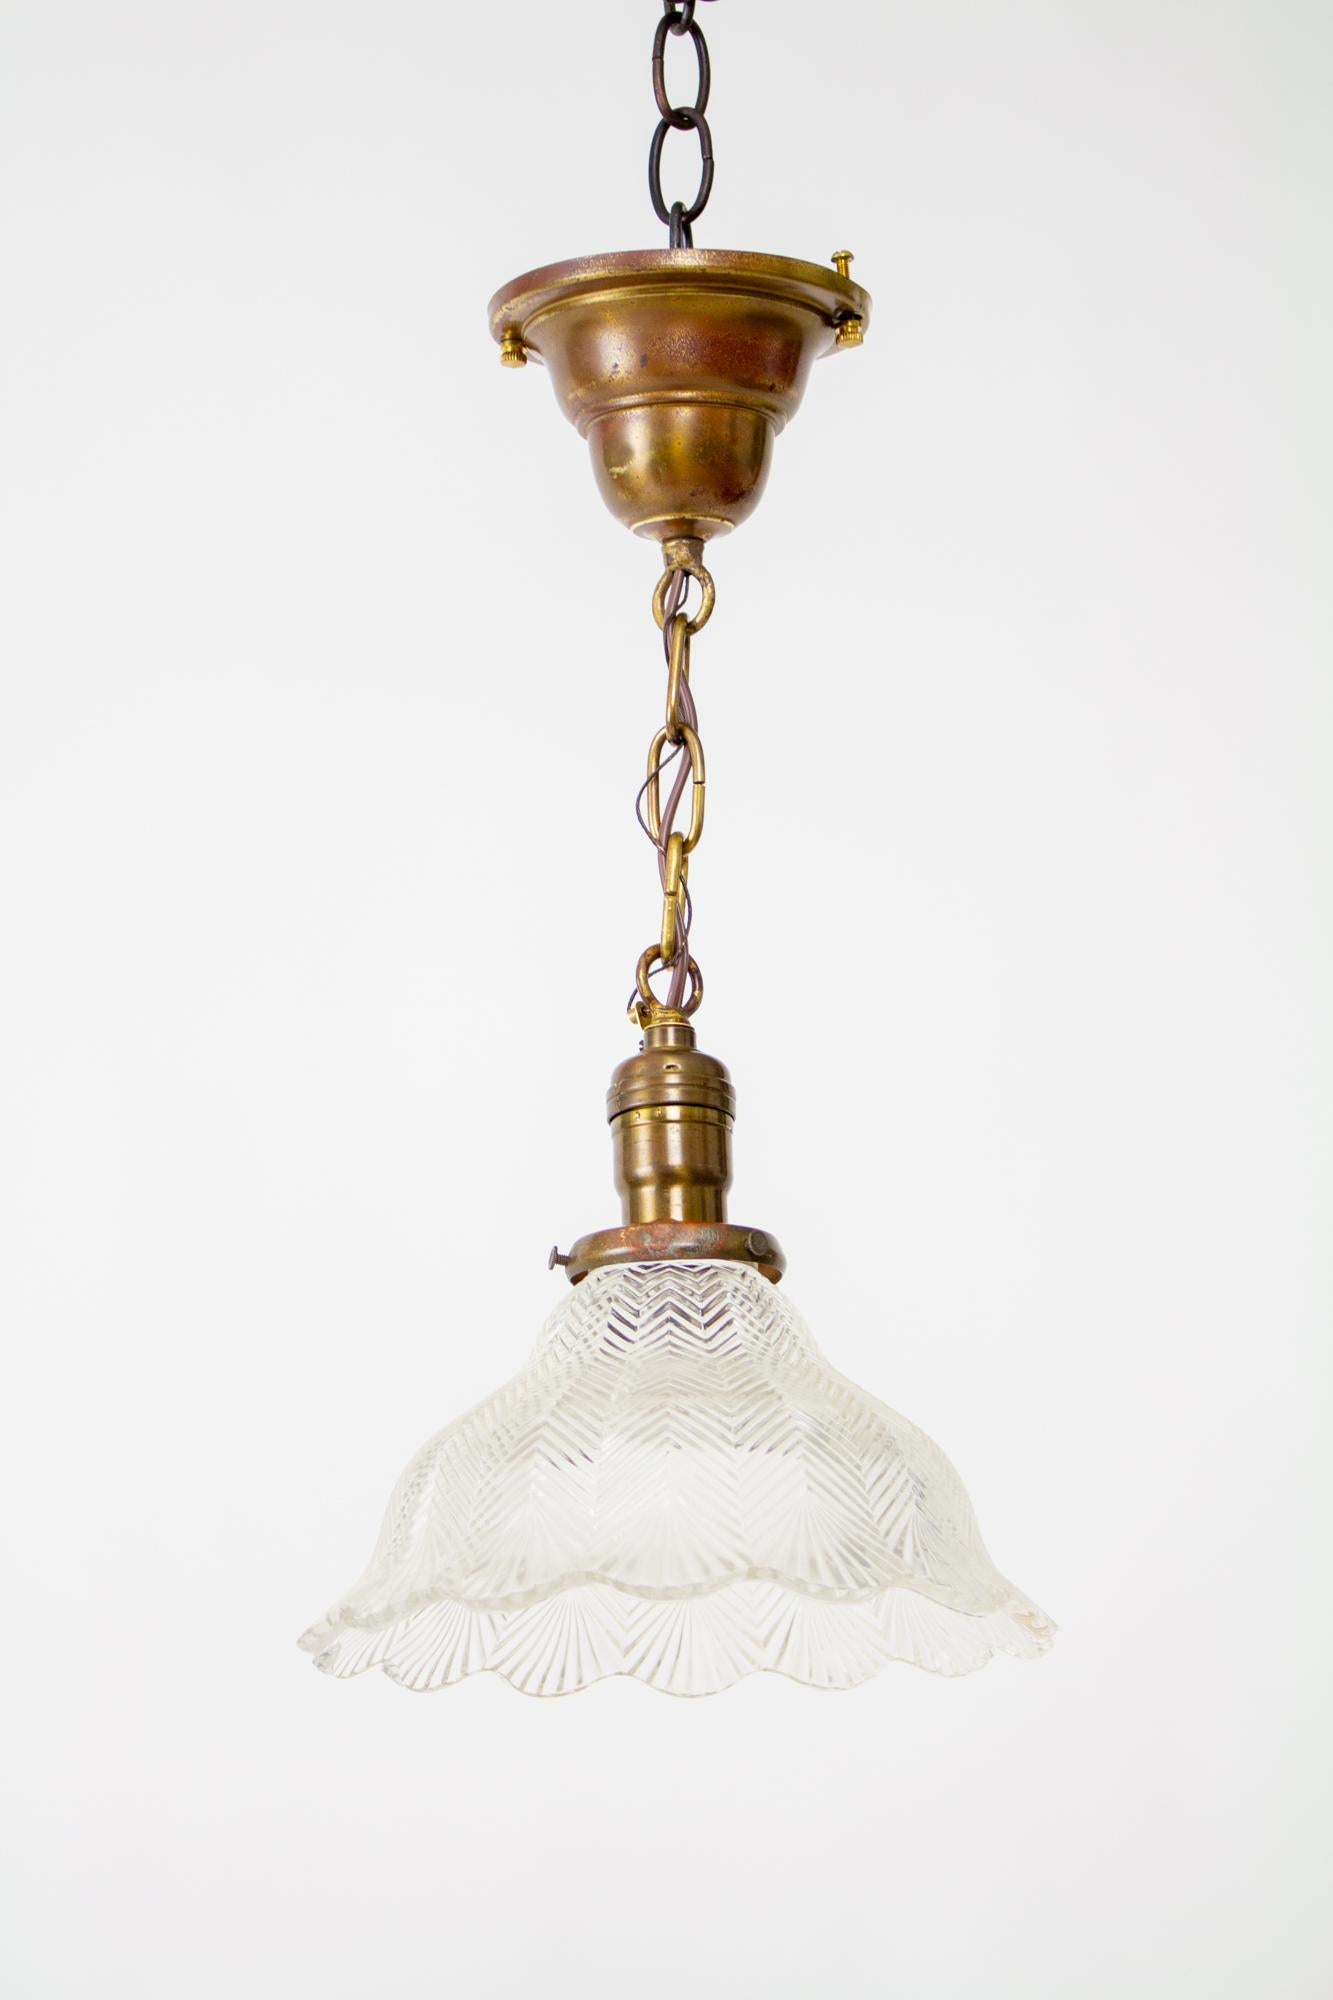 Early Electric Prismatic Hanging Pendant. A simple chain fixture with canopy and bell shaped shareholder. Clear prismatic glass shade in a bell shape with ruffled edges. A classic fixture that would be wonderful for an informal traditional space